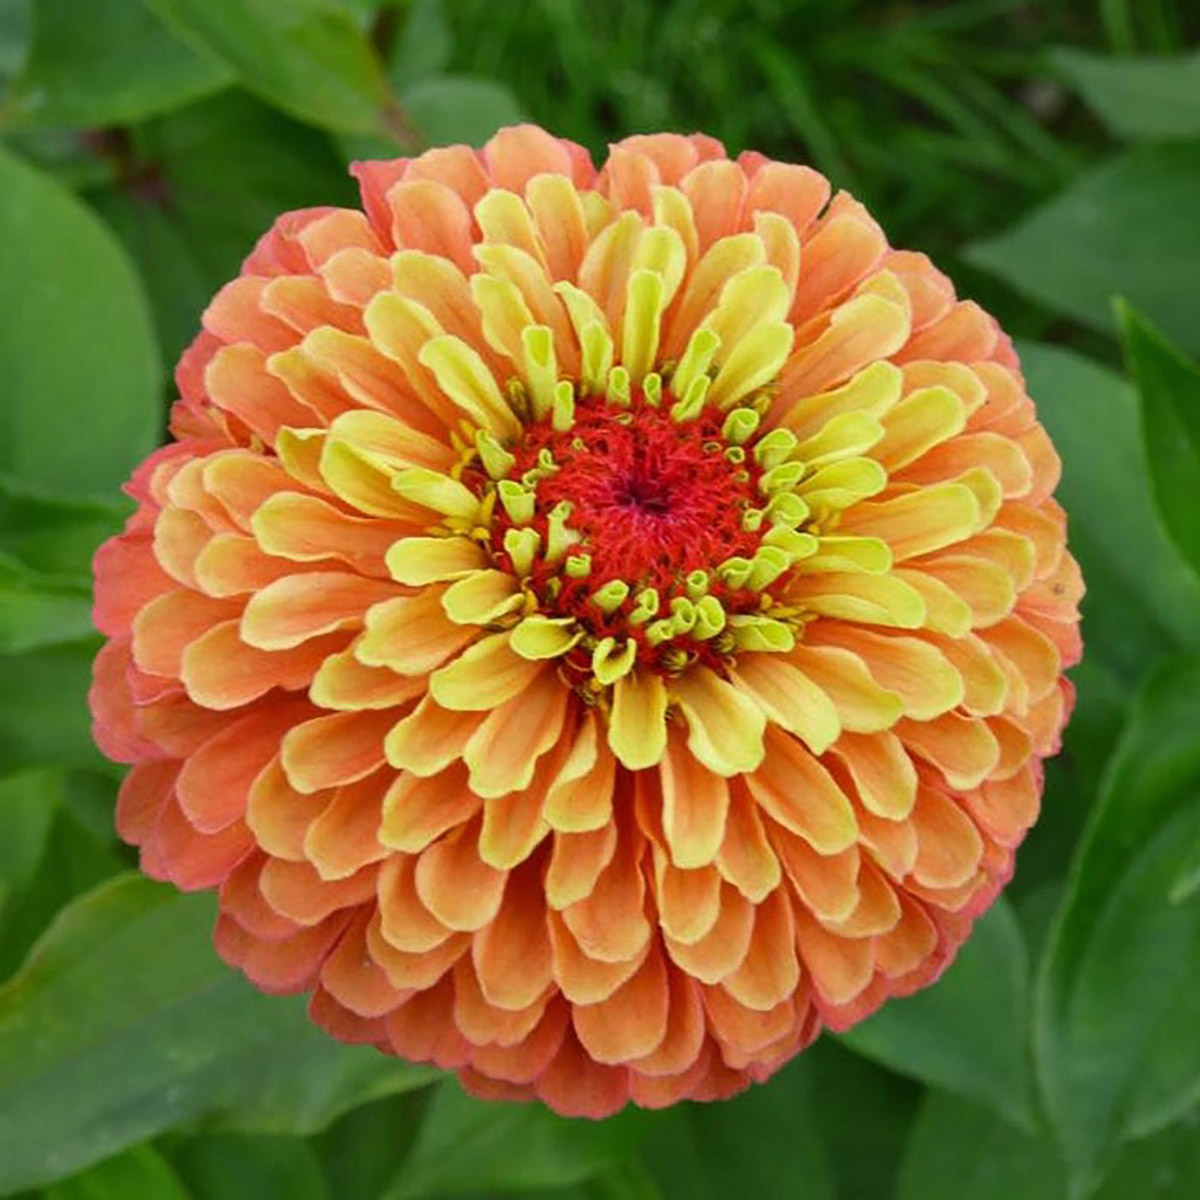 Queen Lime Orange Zinnia - Available on Etsy from ArcadiaSampleSeeds